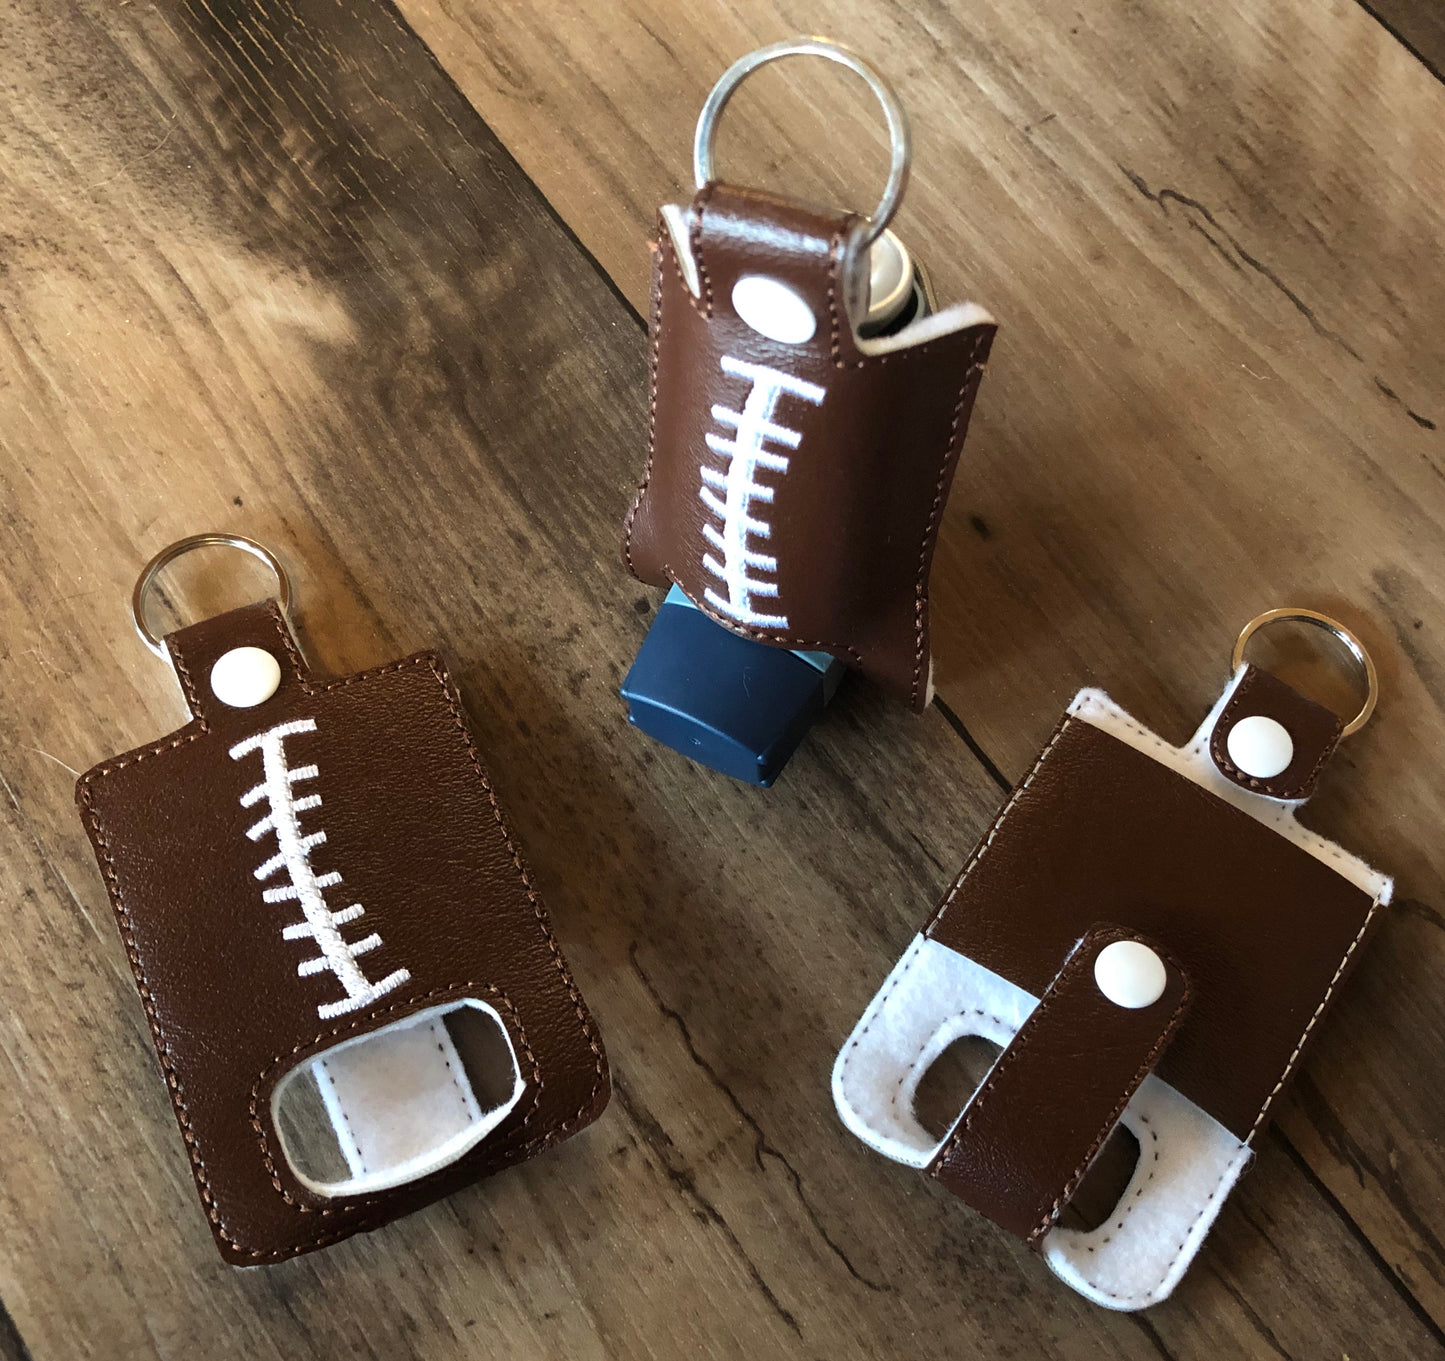 Football Inhaler Holder With Snap Closure and A Key Ring